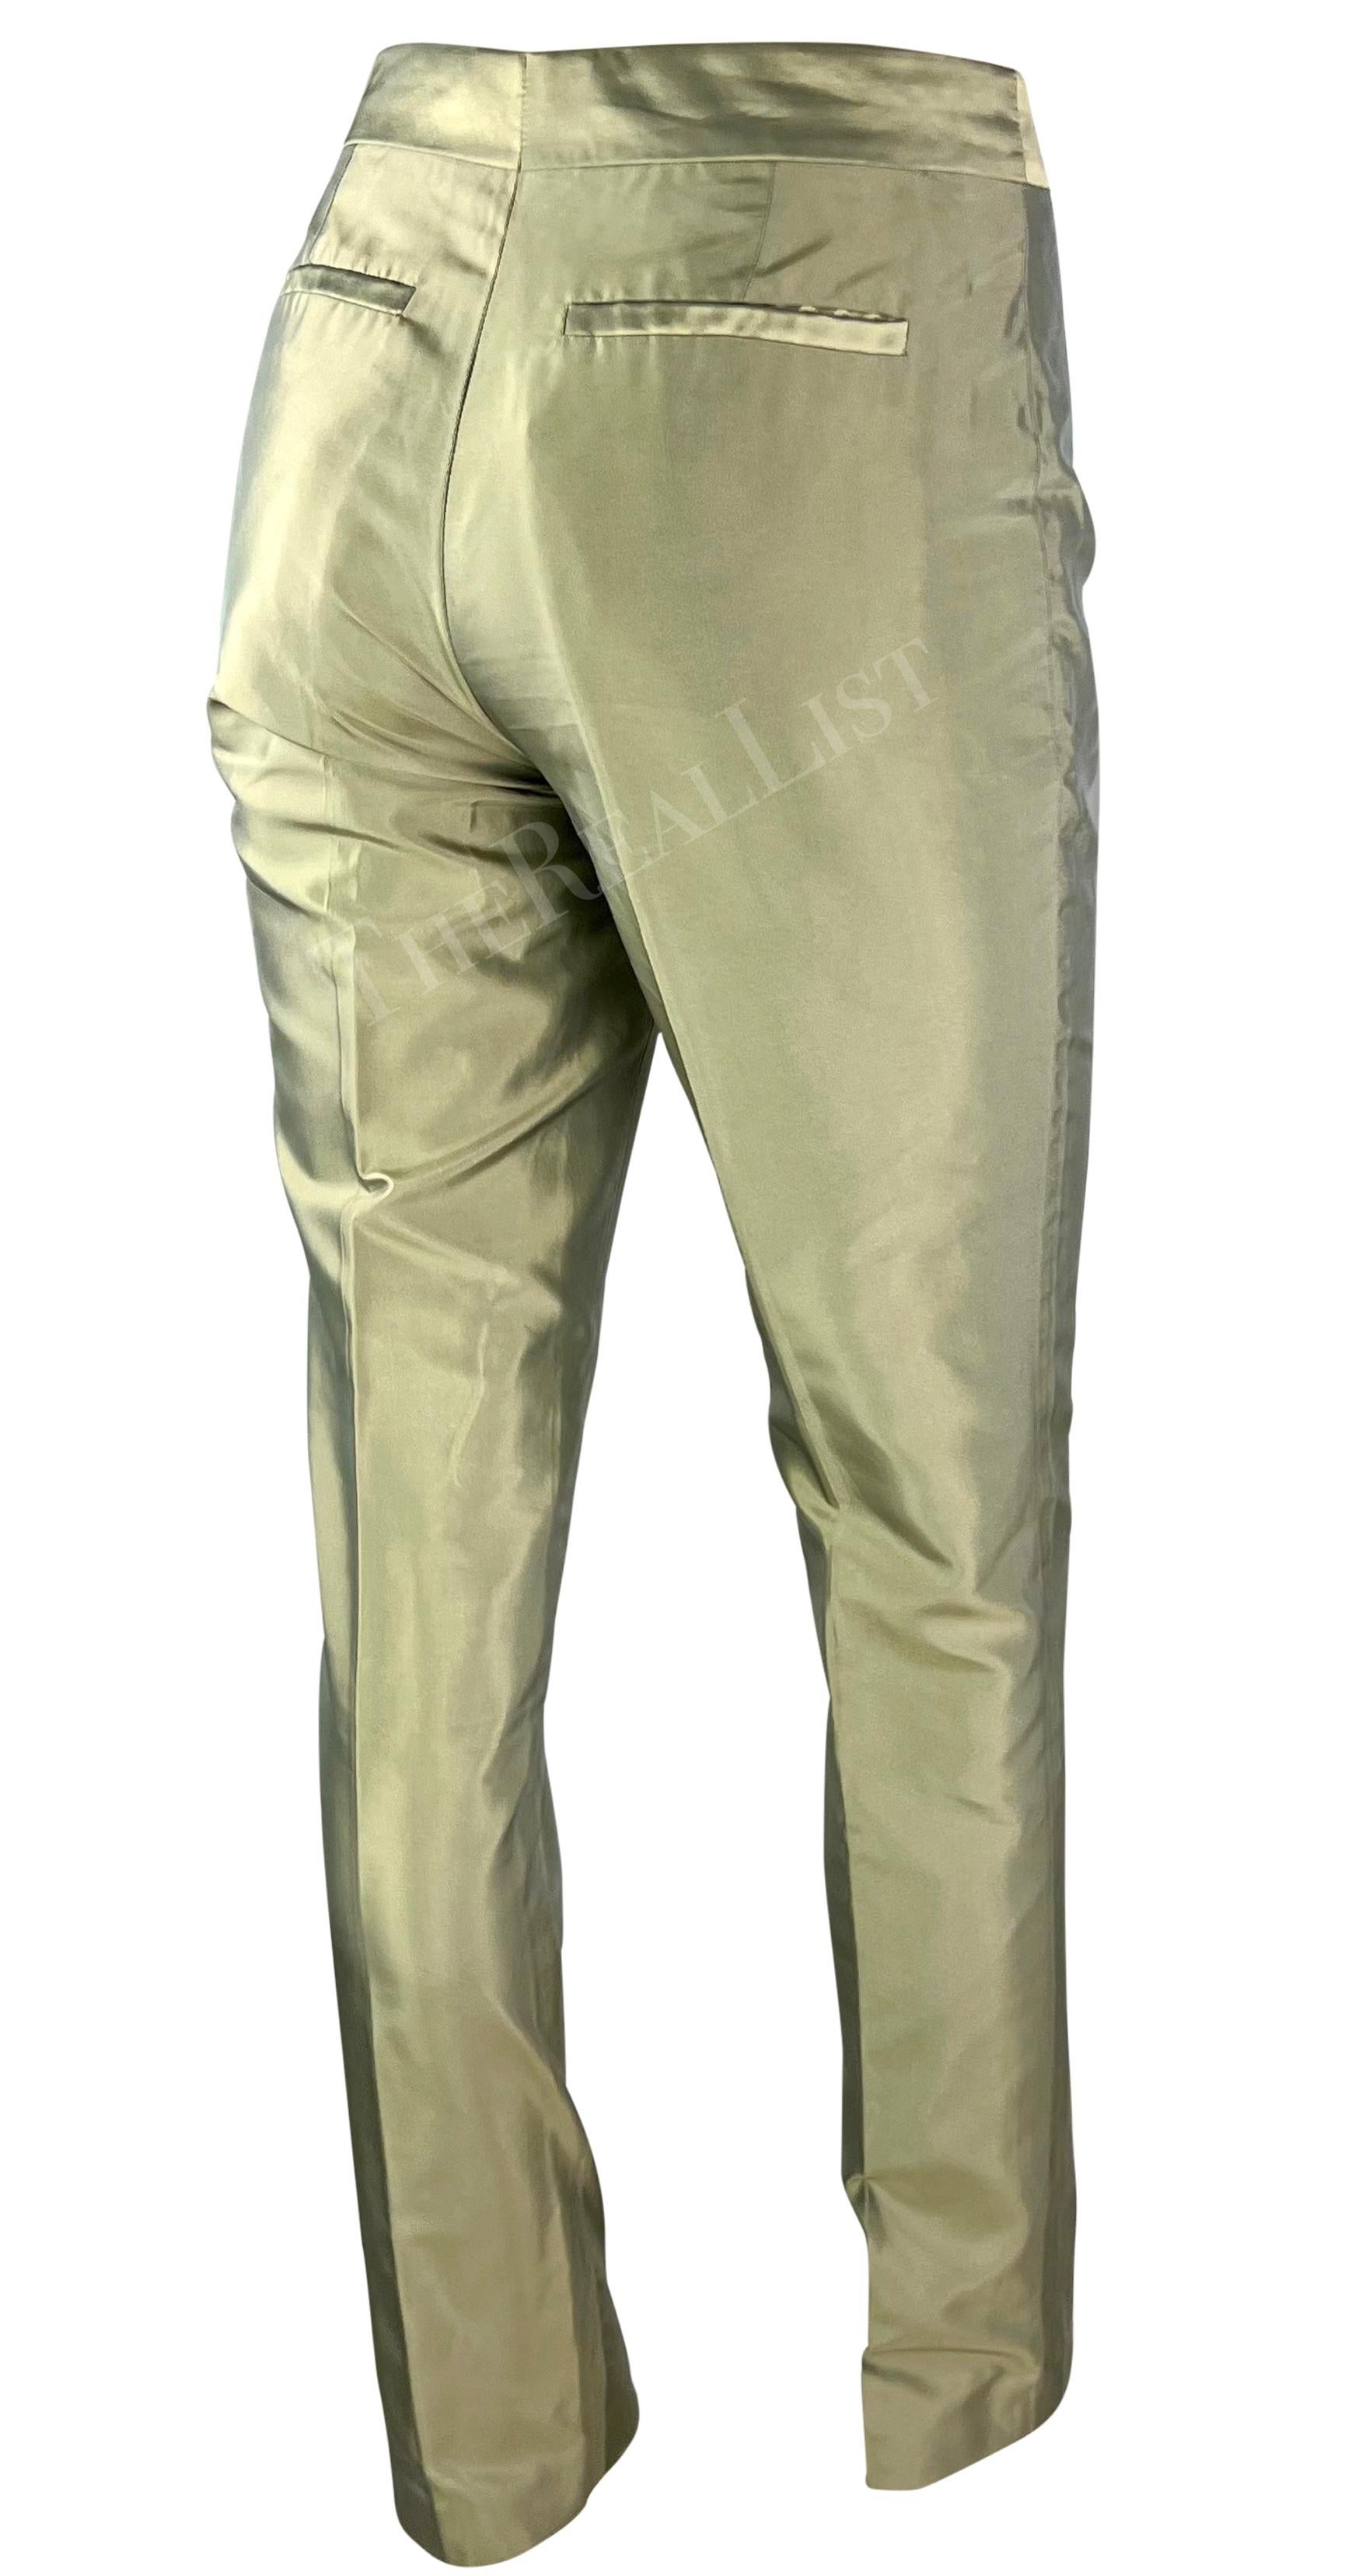 S/S 2000 Gucci by Tom Ford Light Green Iridescent Silk Straight Leg Pants For Sale 1